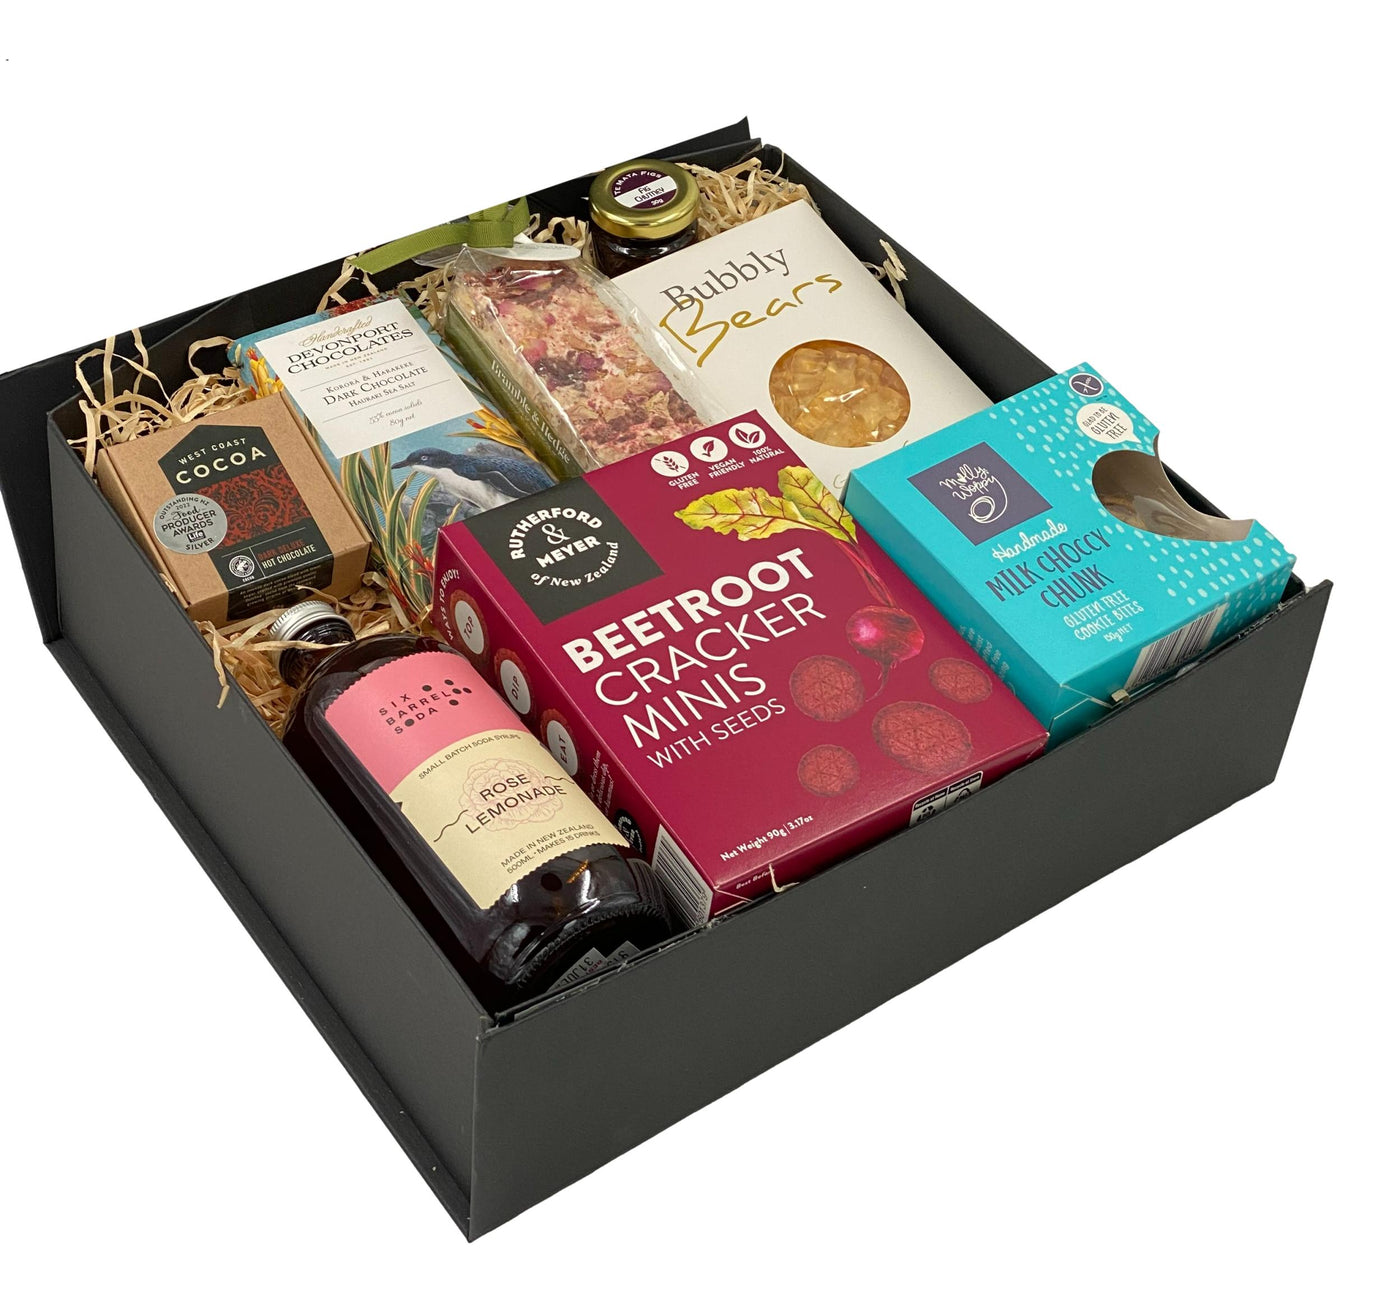 NZ Gluten Free Gift Boxes and Gift Hampers - Basket Creations